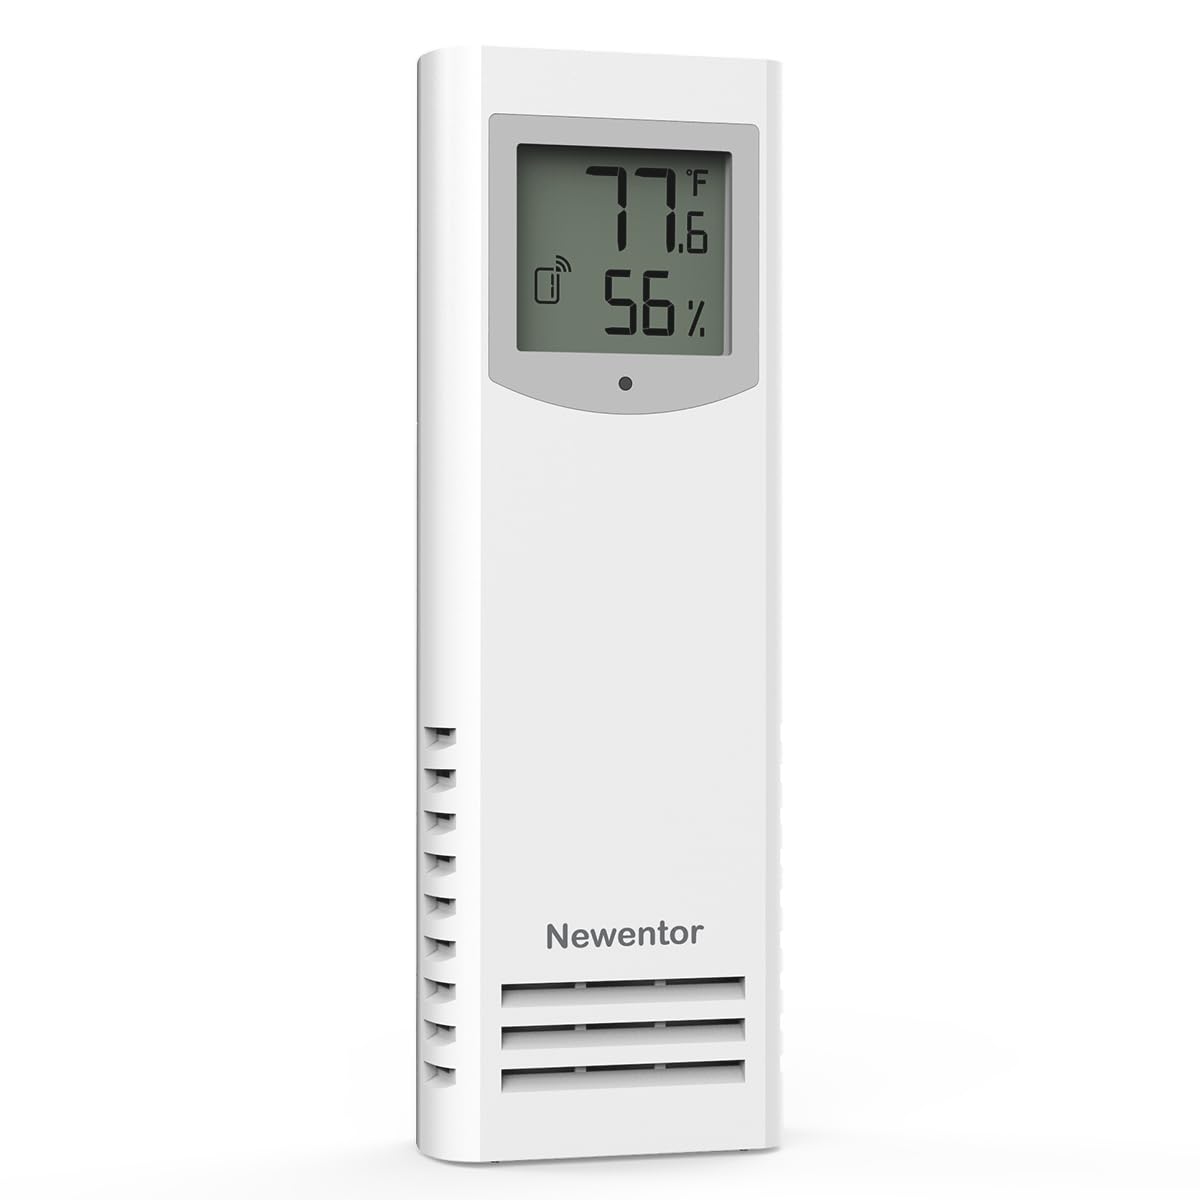  Newentor Indoor Outdoor Thermometer Wireless, Remote